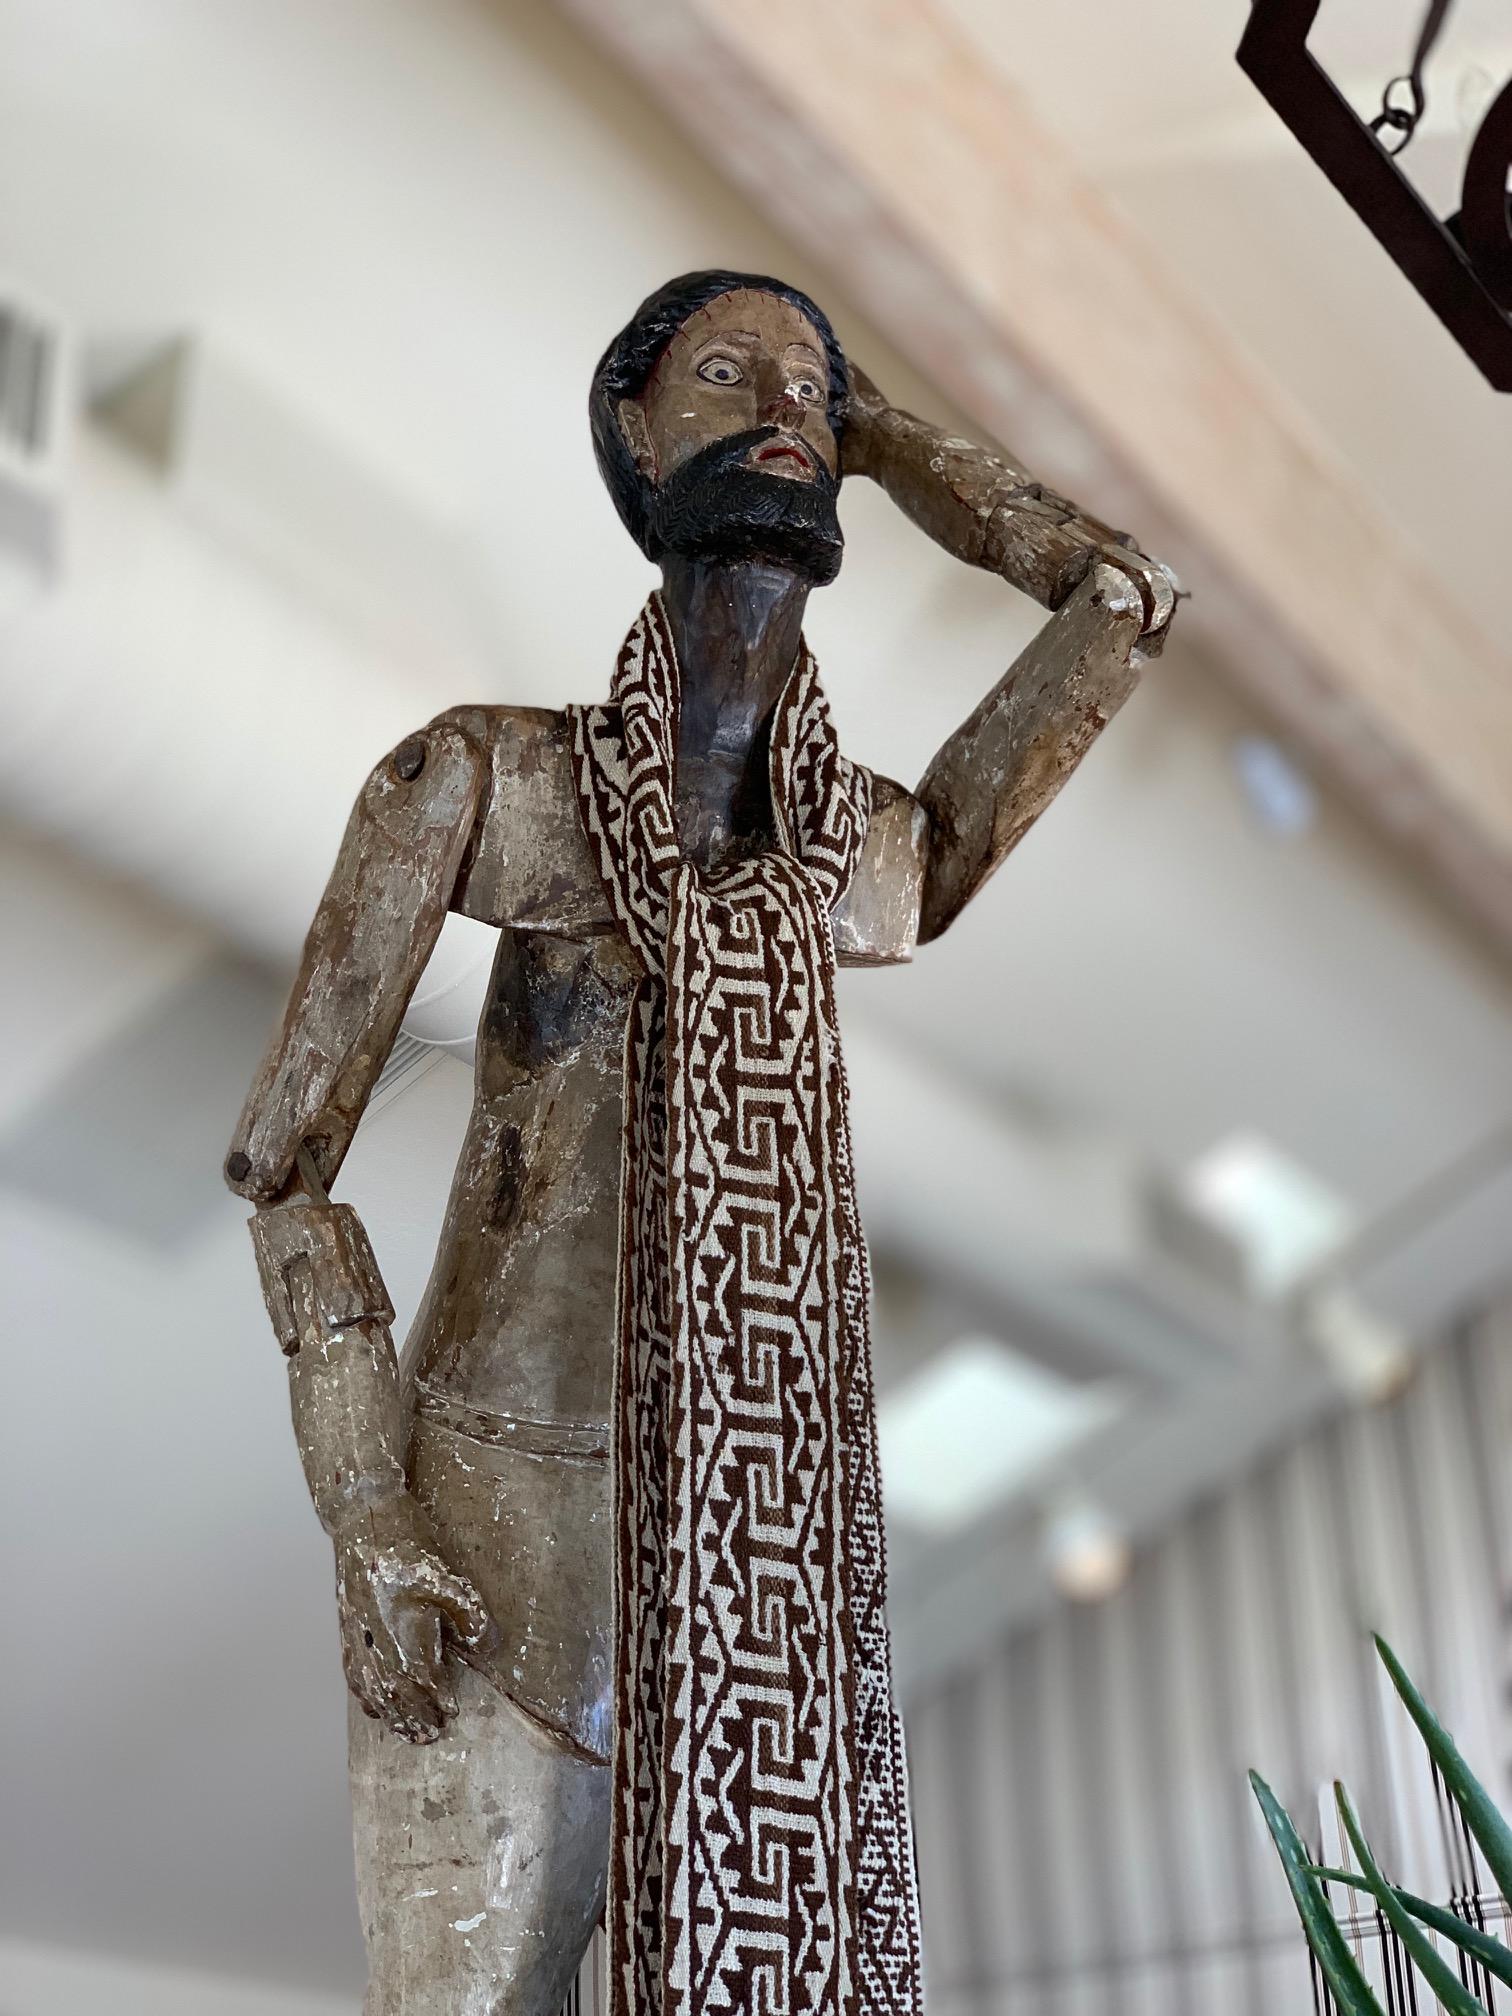 Exquisite example, life-size reticulated Jesus Santo. 18th century, Mexican. Hand-carved from pine wood, ghesso, and showing wonderful age and patina.